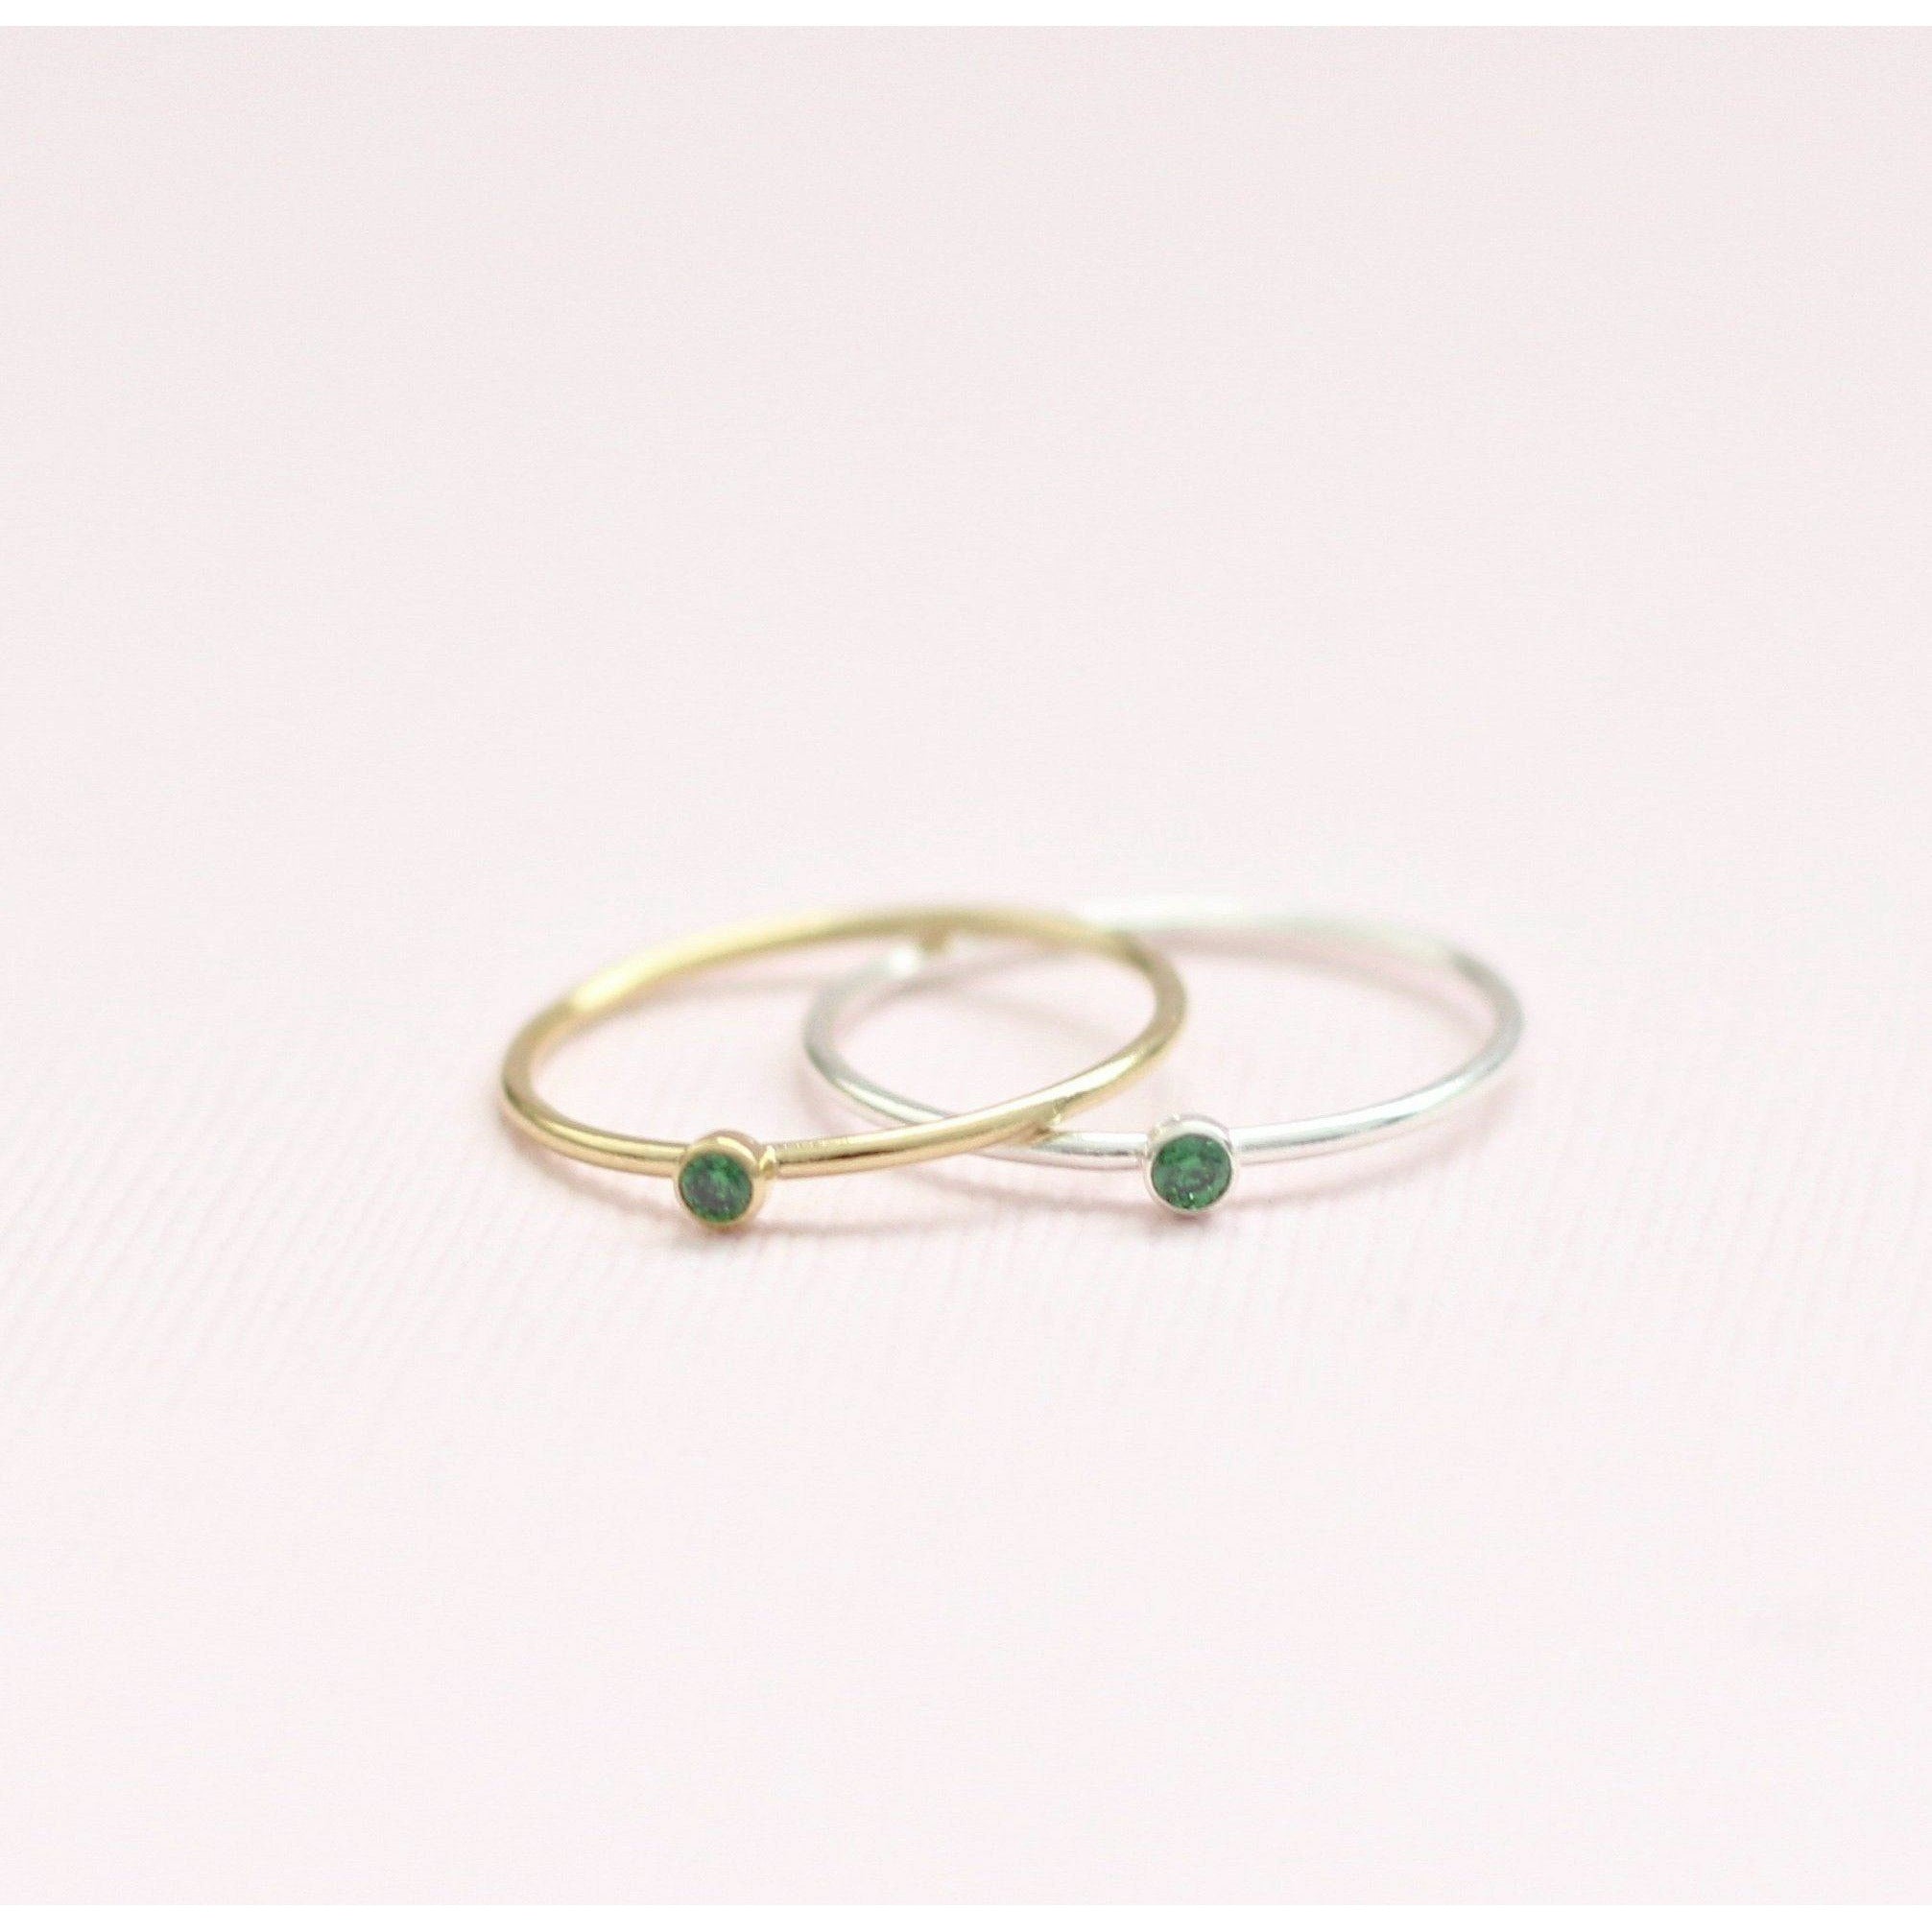 Handmade May Emerald birthstone rings made with sterling silver and gold filled. Handmade May birthstone ring sustainably made in Canada. 